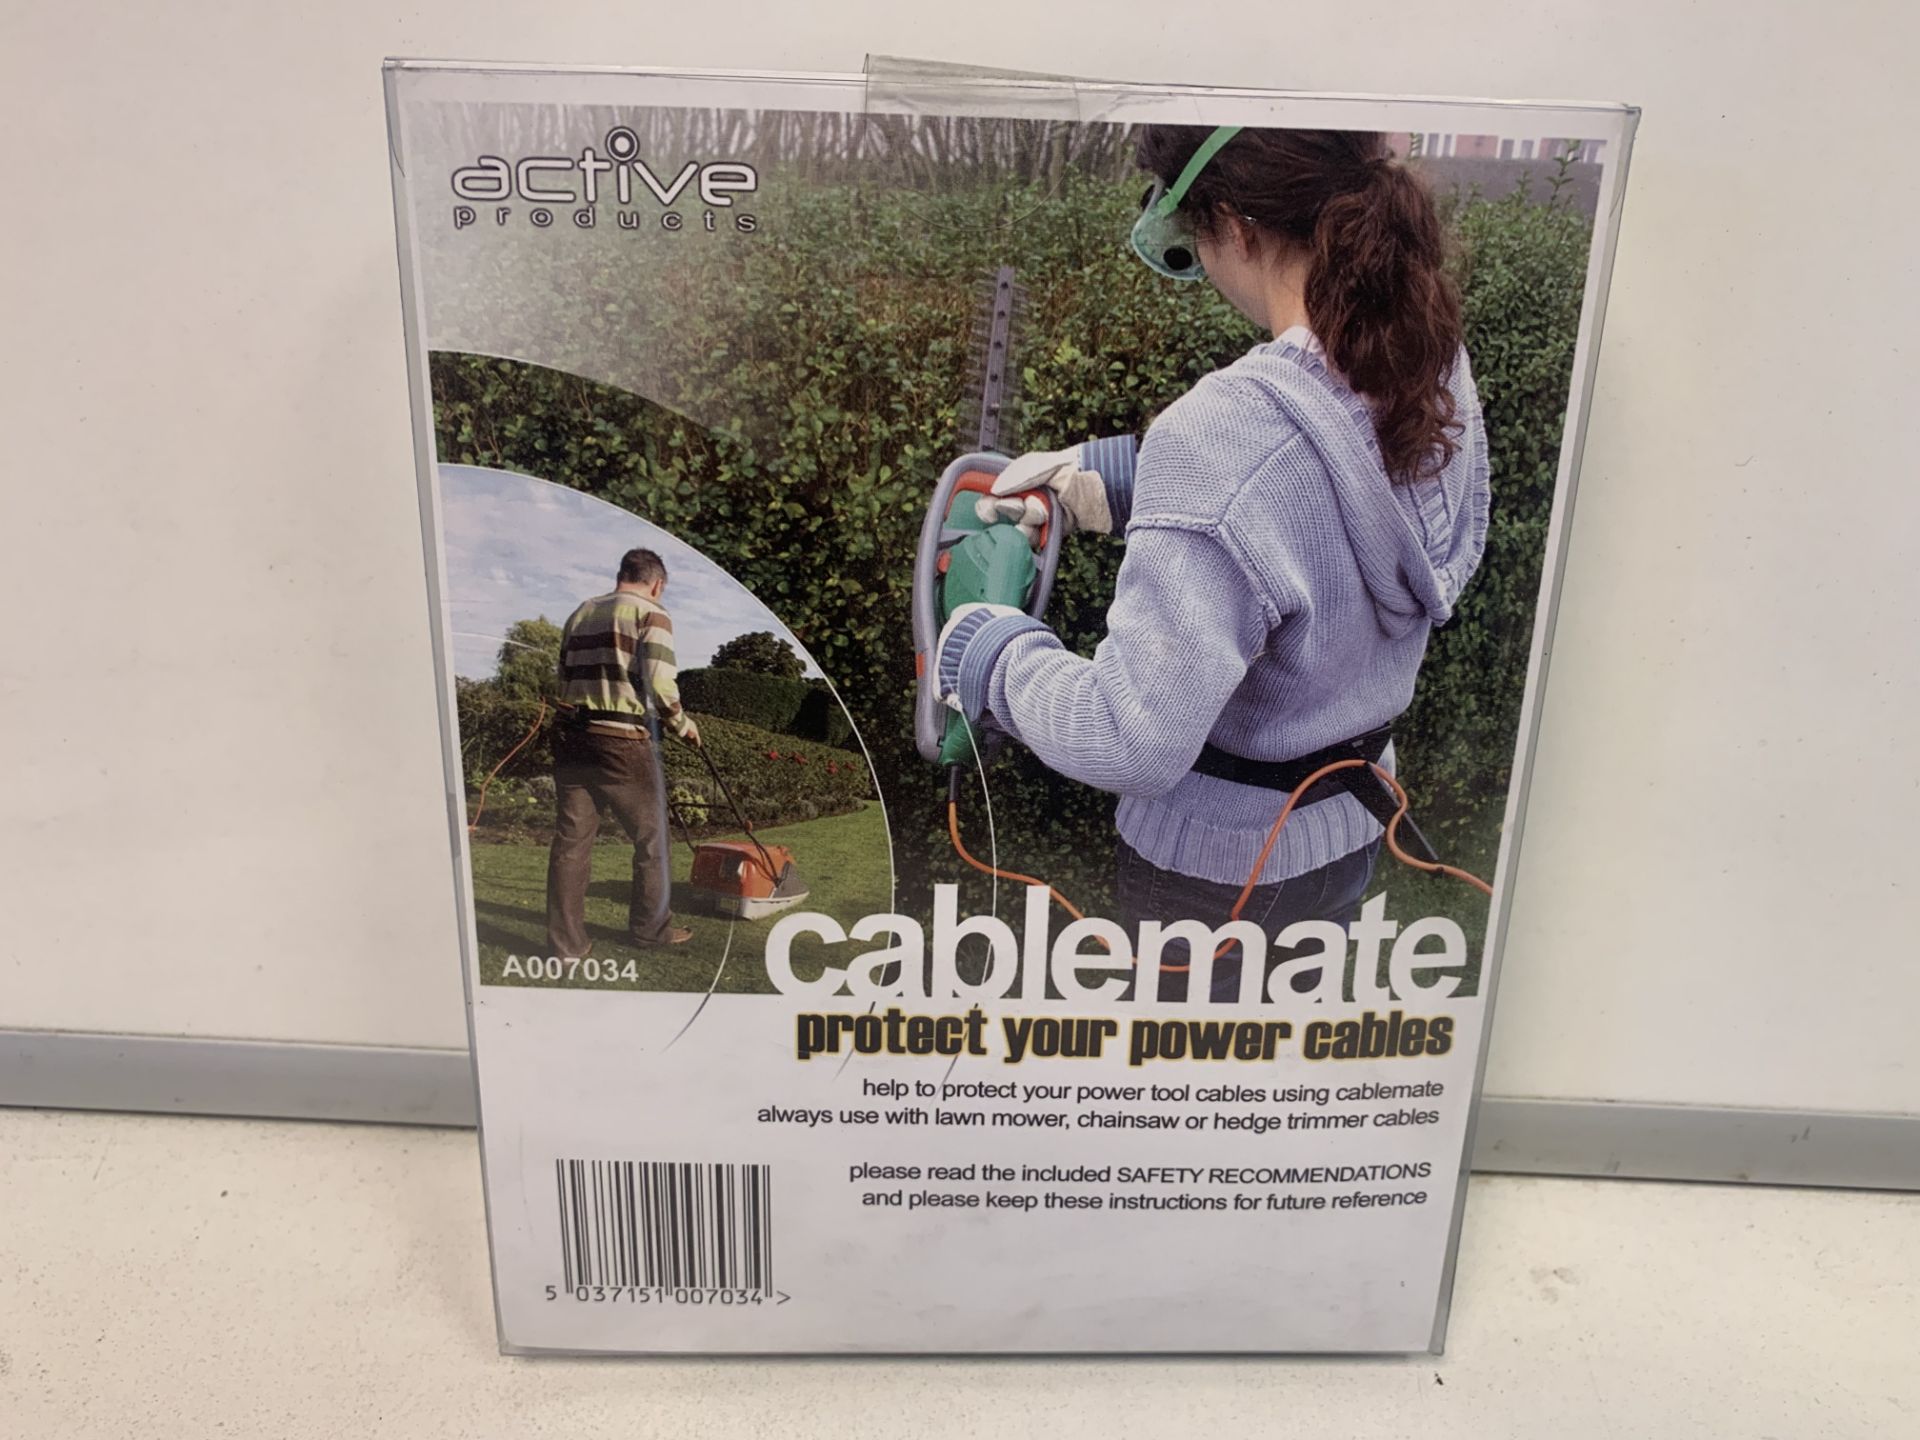 32 X BRAND NEW PACKS OF CABLEMATE PROTECT YOUR POWER CABLES